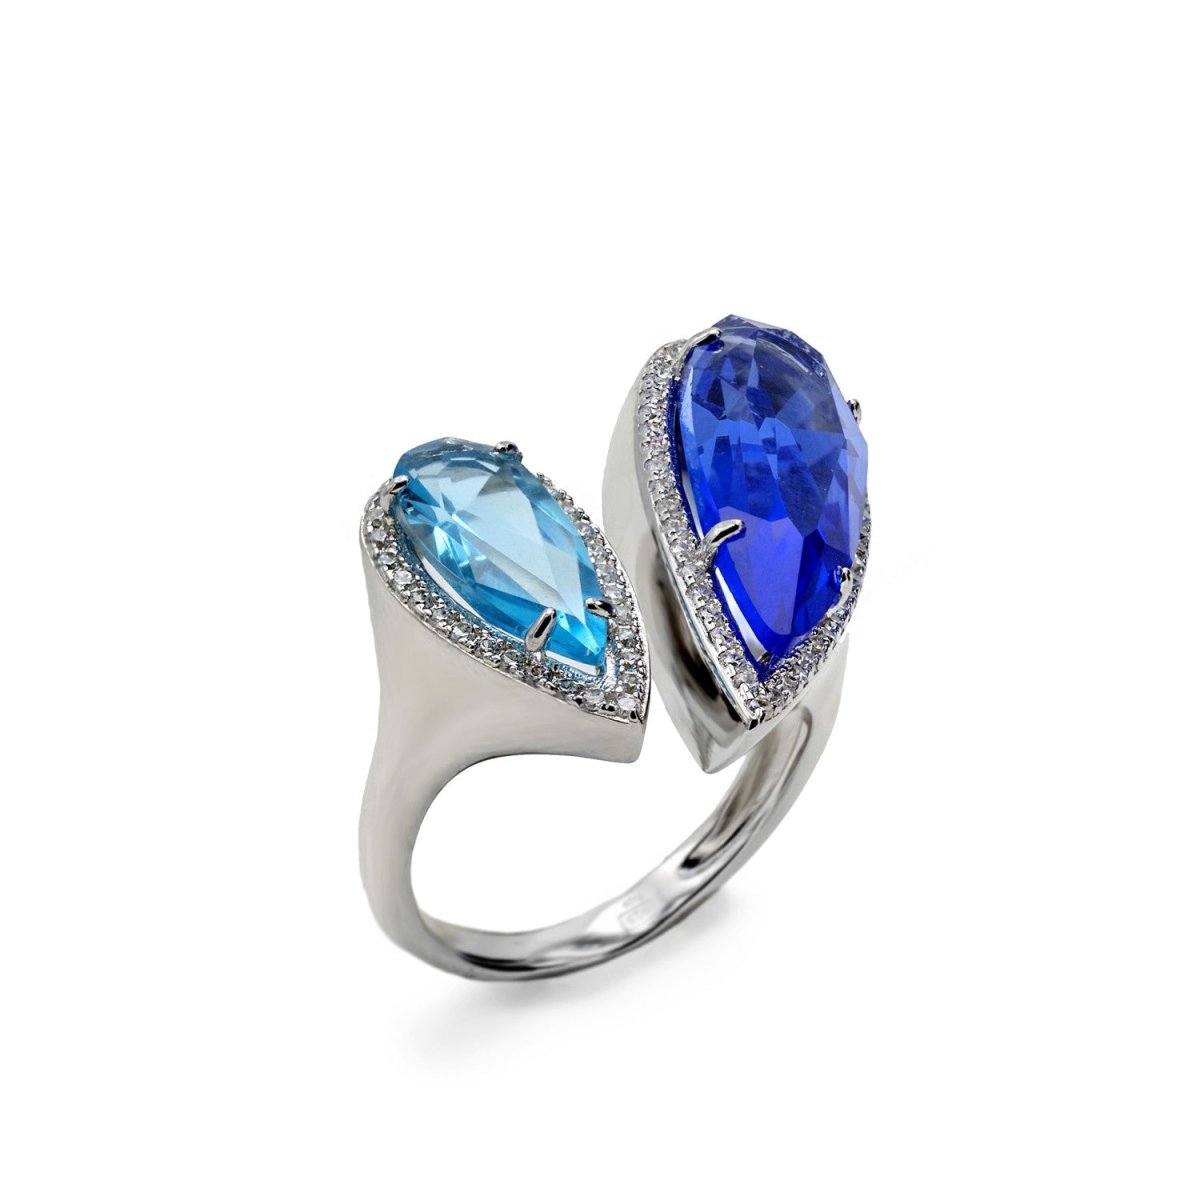 Ring - Rings with pear cut blue stones and zircons